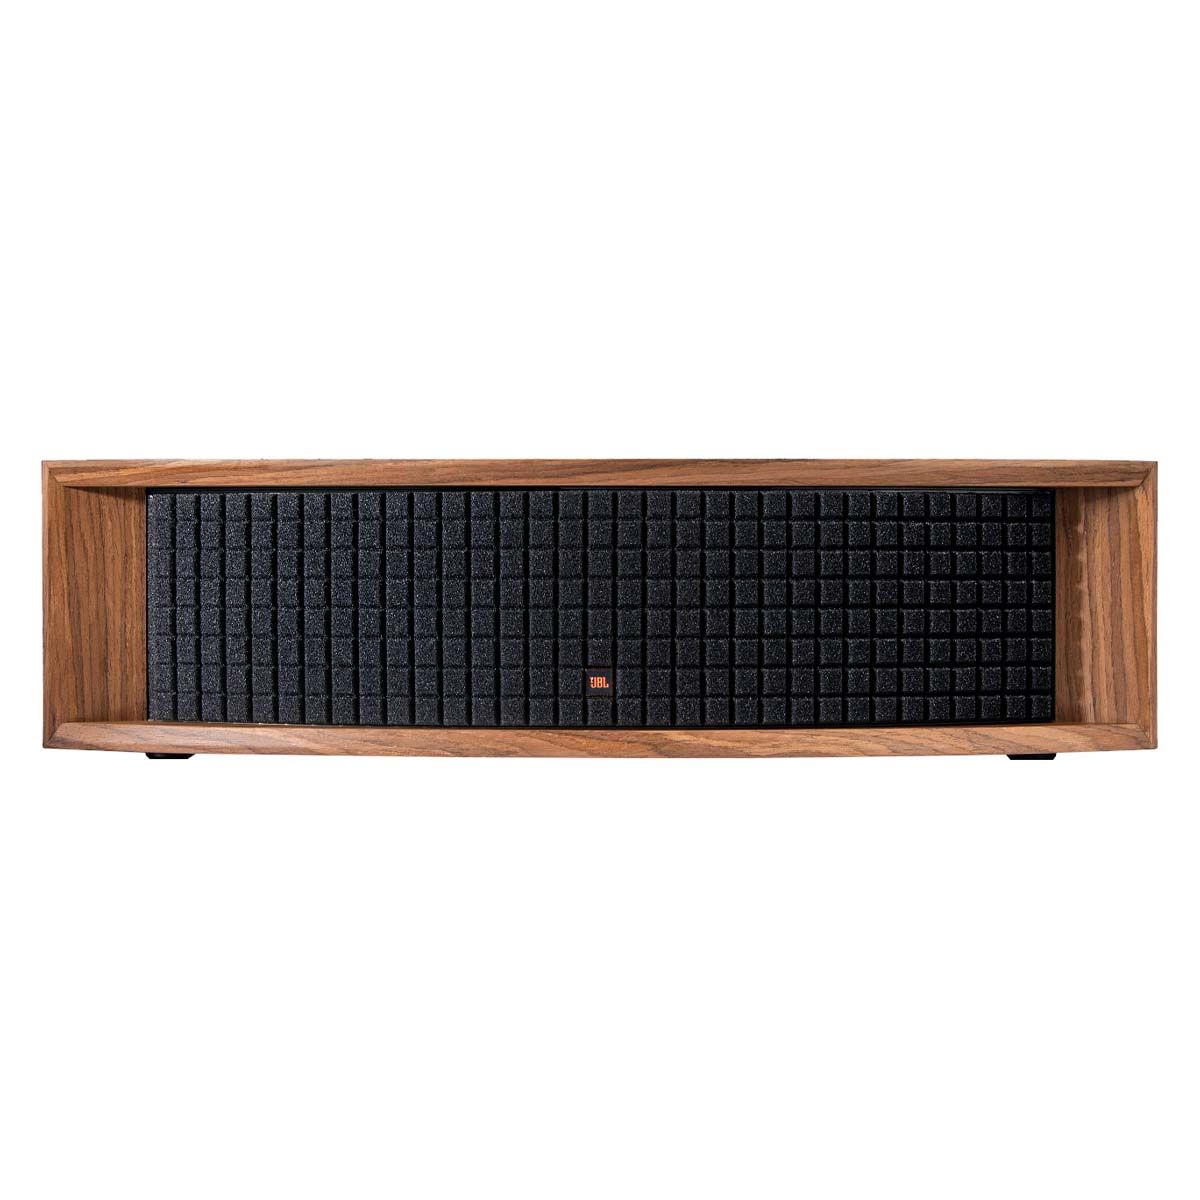 JBL L75ms Music System - Walnut front view with grille